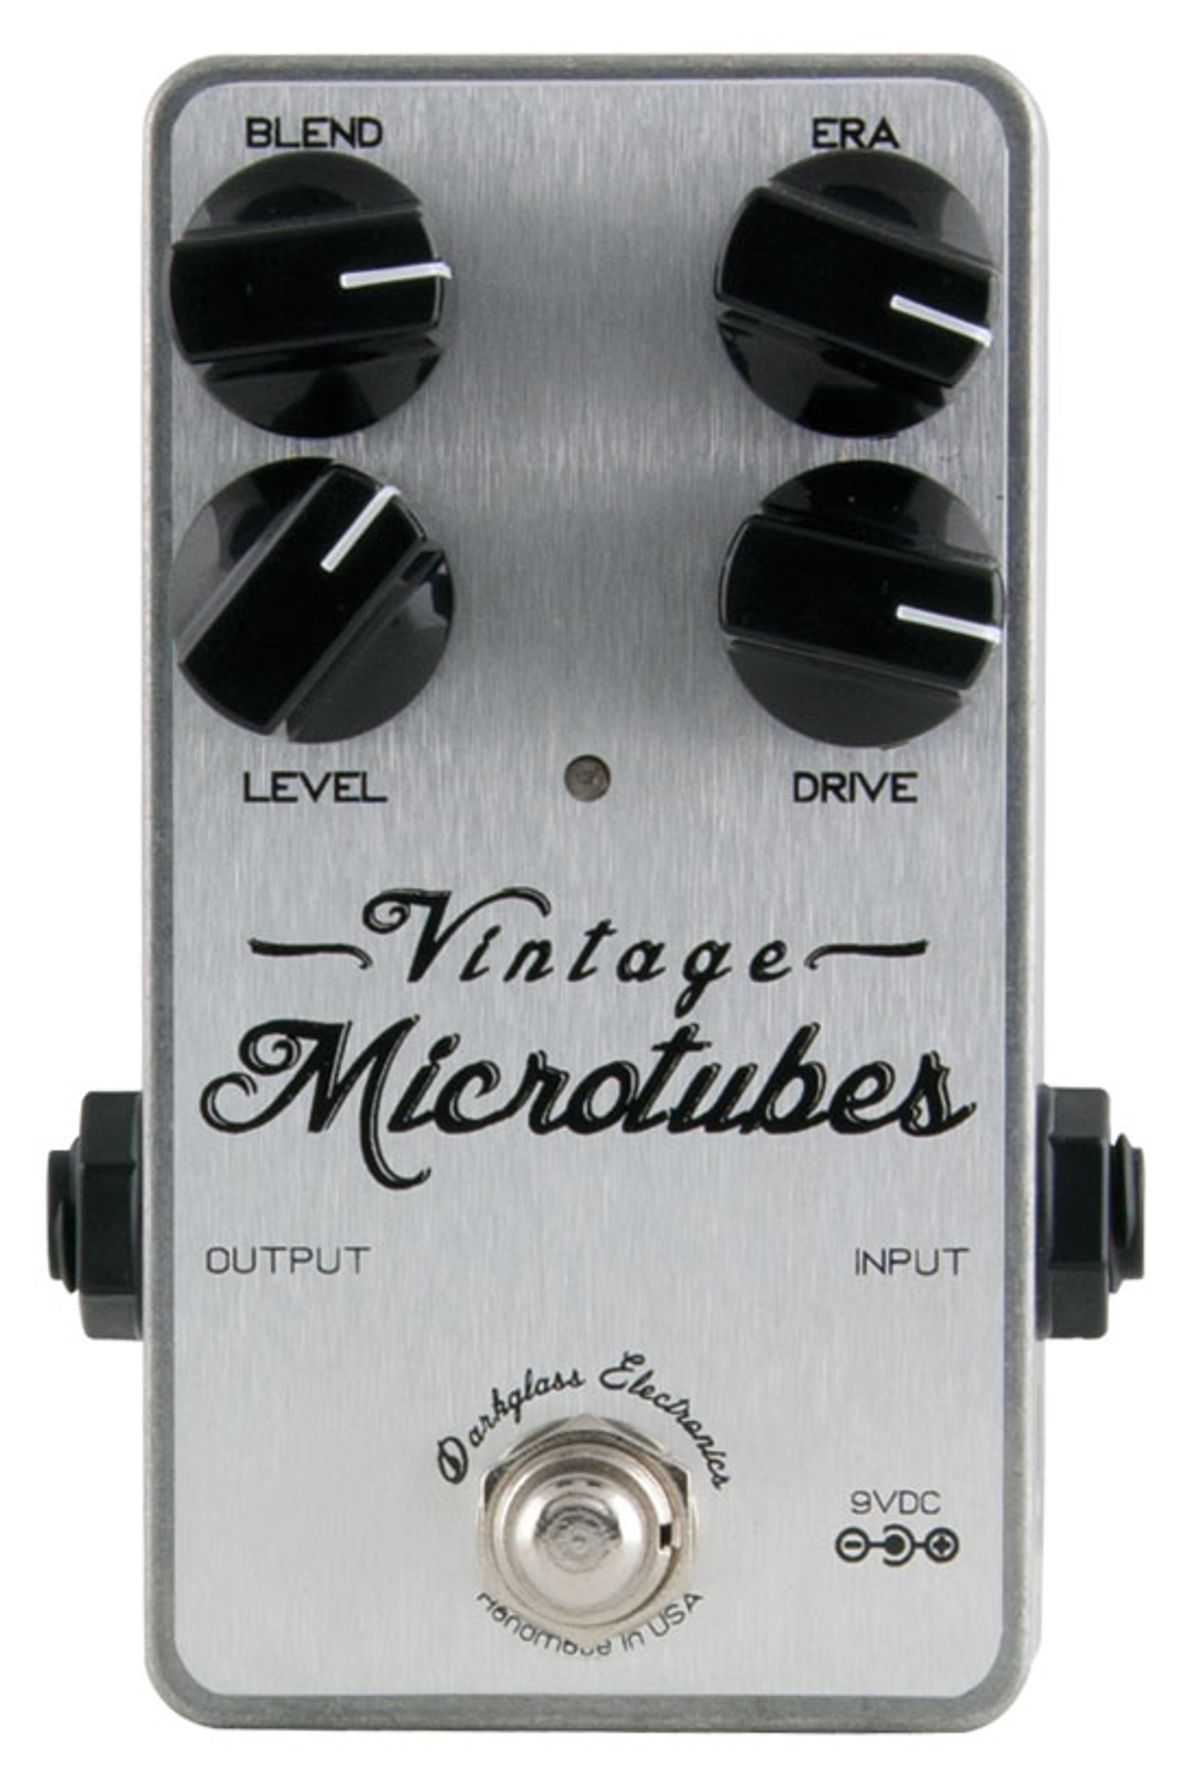 Darkglass Electronics Microtubes Vintage Pedal Review